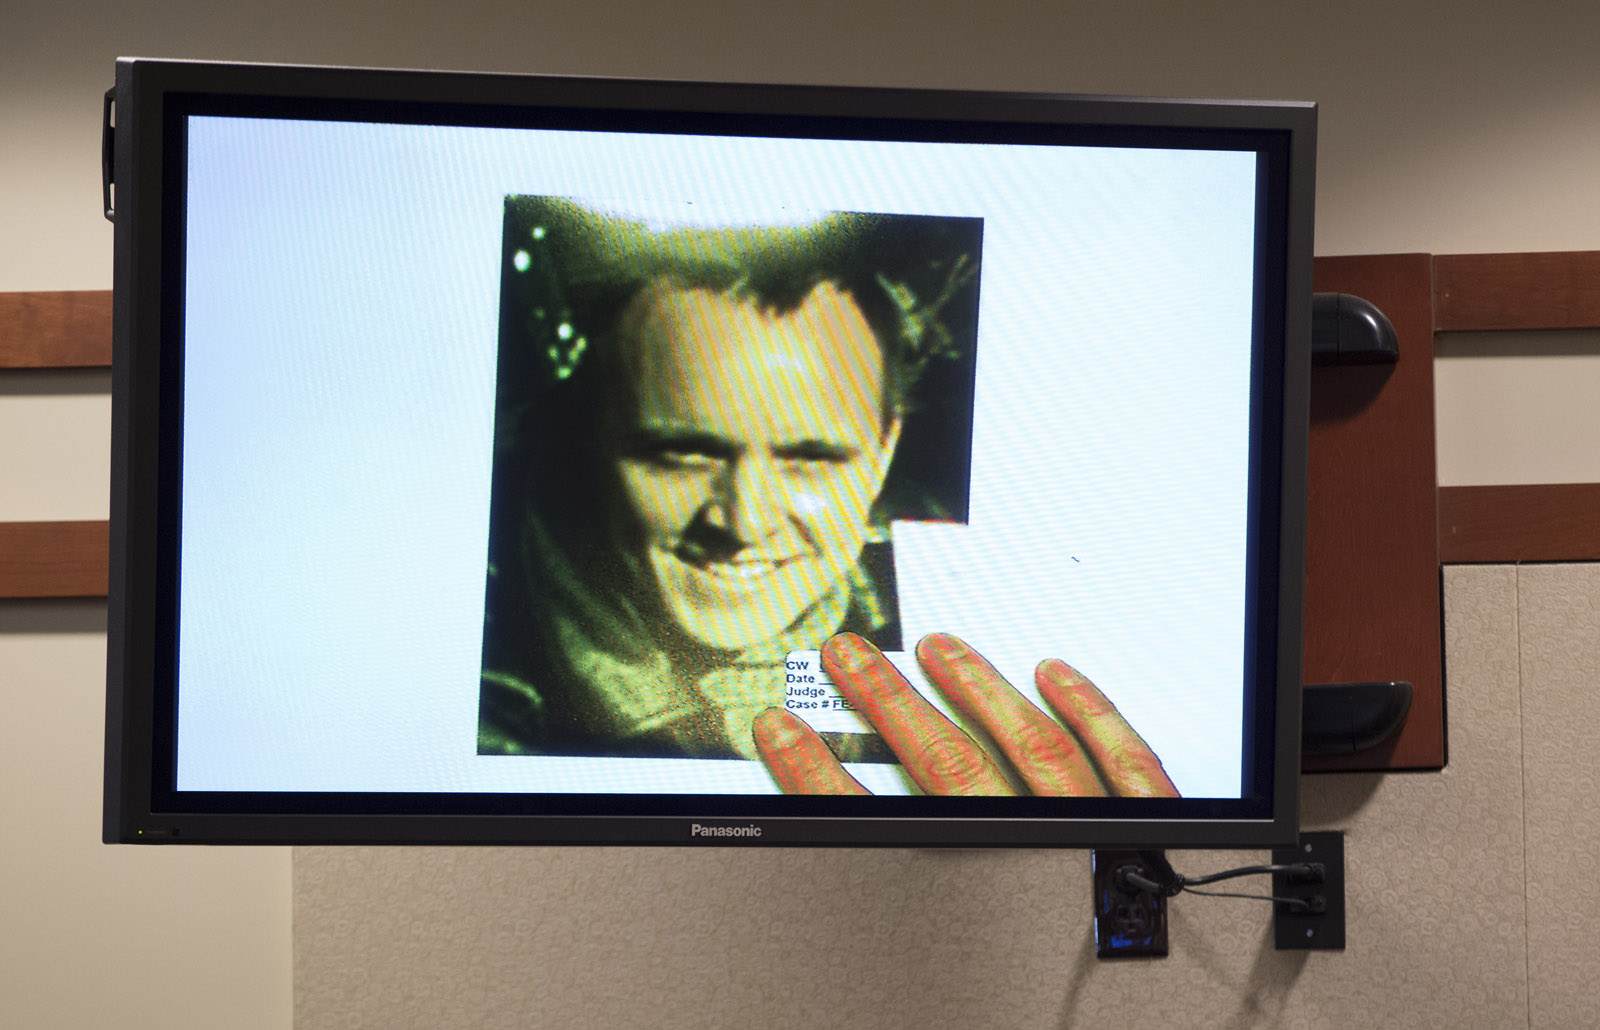 An old photo of Charles Severance is shown on a monitor during his murder trial at the Fairfax County Circuit Court in Fairfax, Va., Friday, Oct. 16, 2015. The FBI used this and other known images of Severance to compare them against surveillance footage taken at the Potomac Yards Target in the hours before Nancy Dunning was murdered in 2003. (AP Photo/Evan Vucci, Pool)